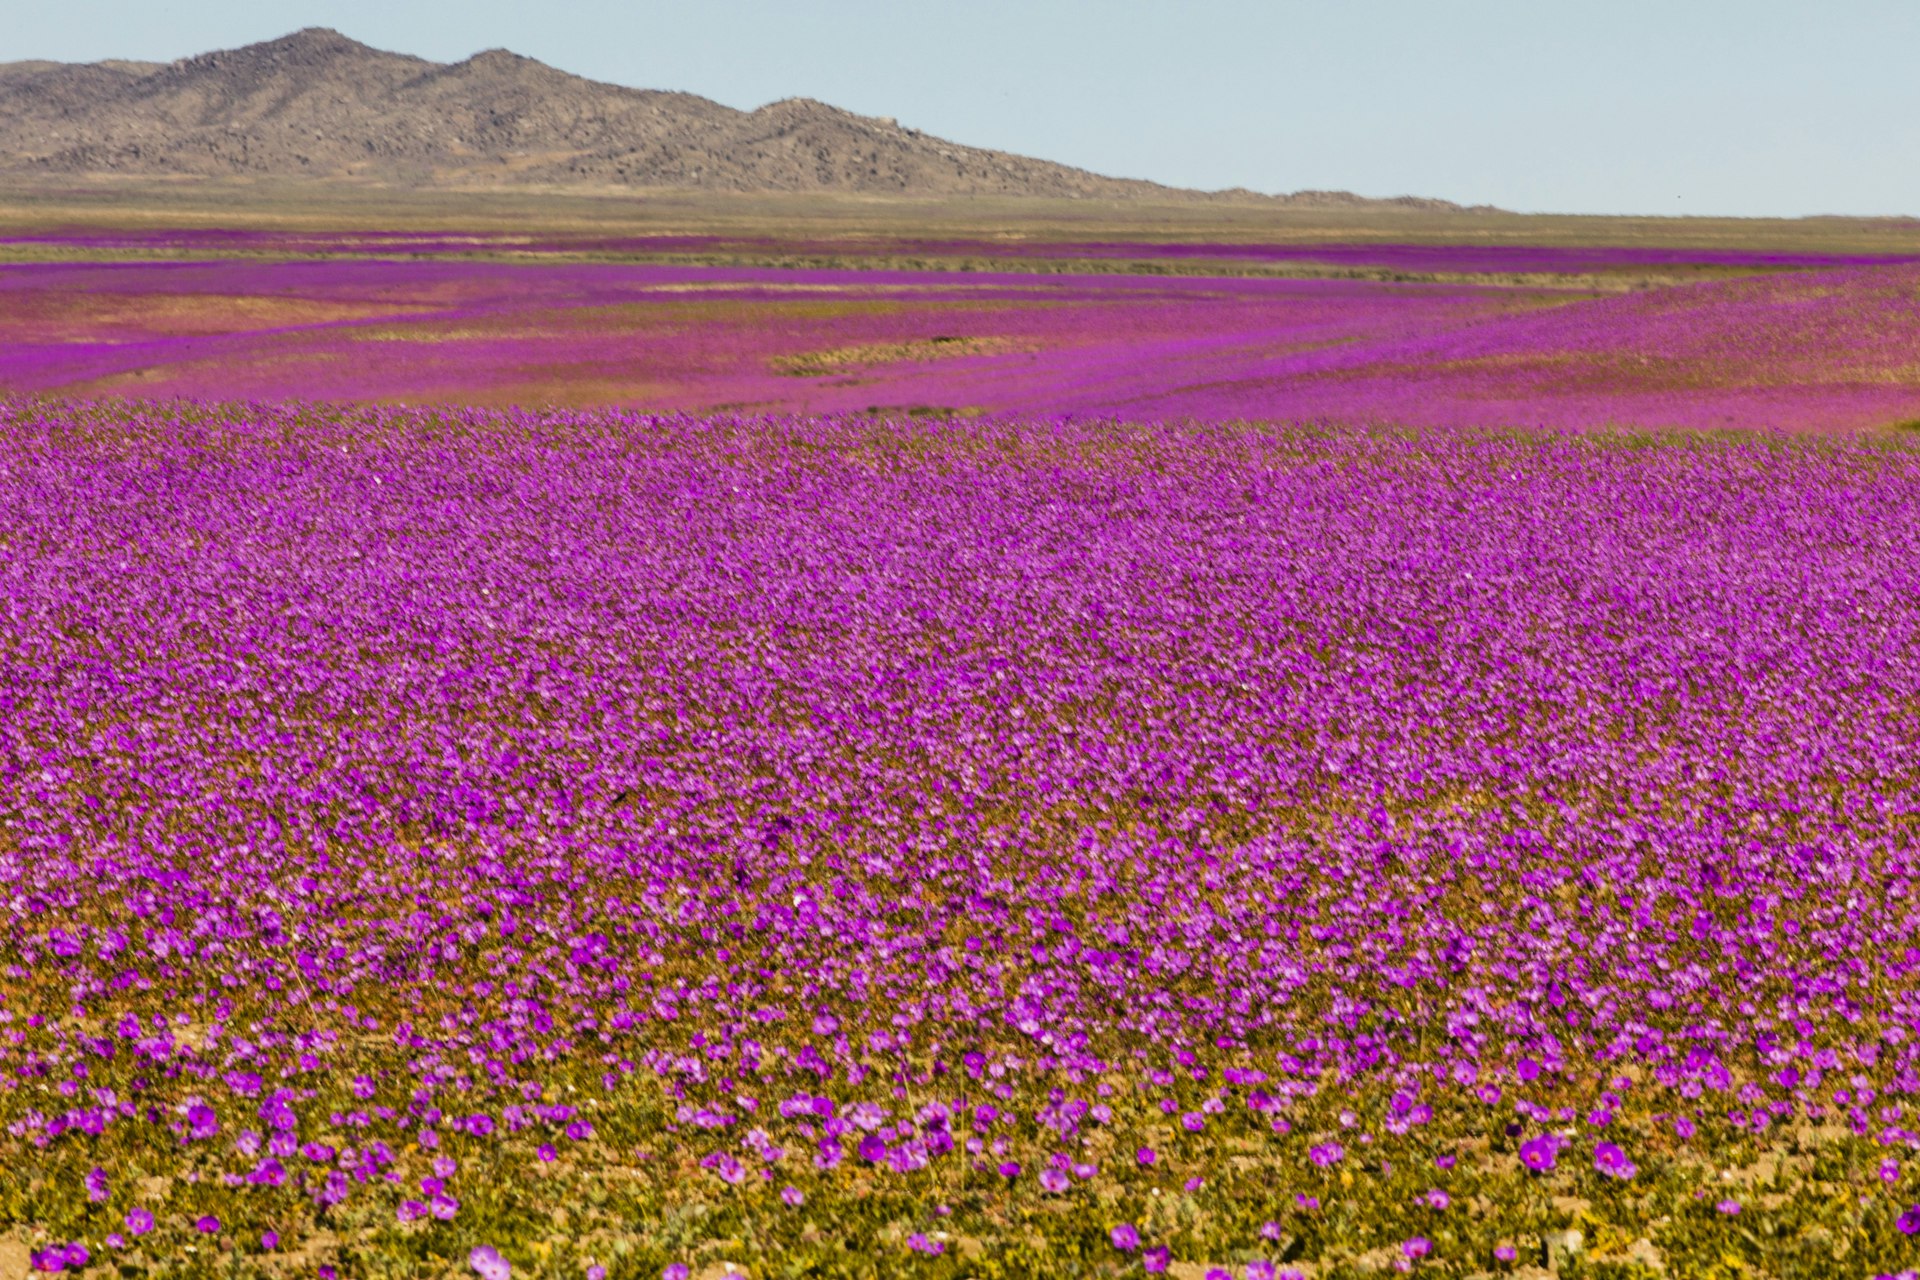 Purple flowers bloom during a “desierto florido” in the Atacama Desert, Chile, South Americ